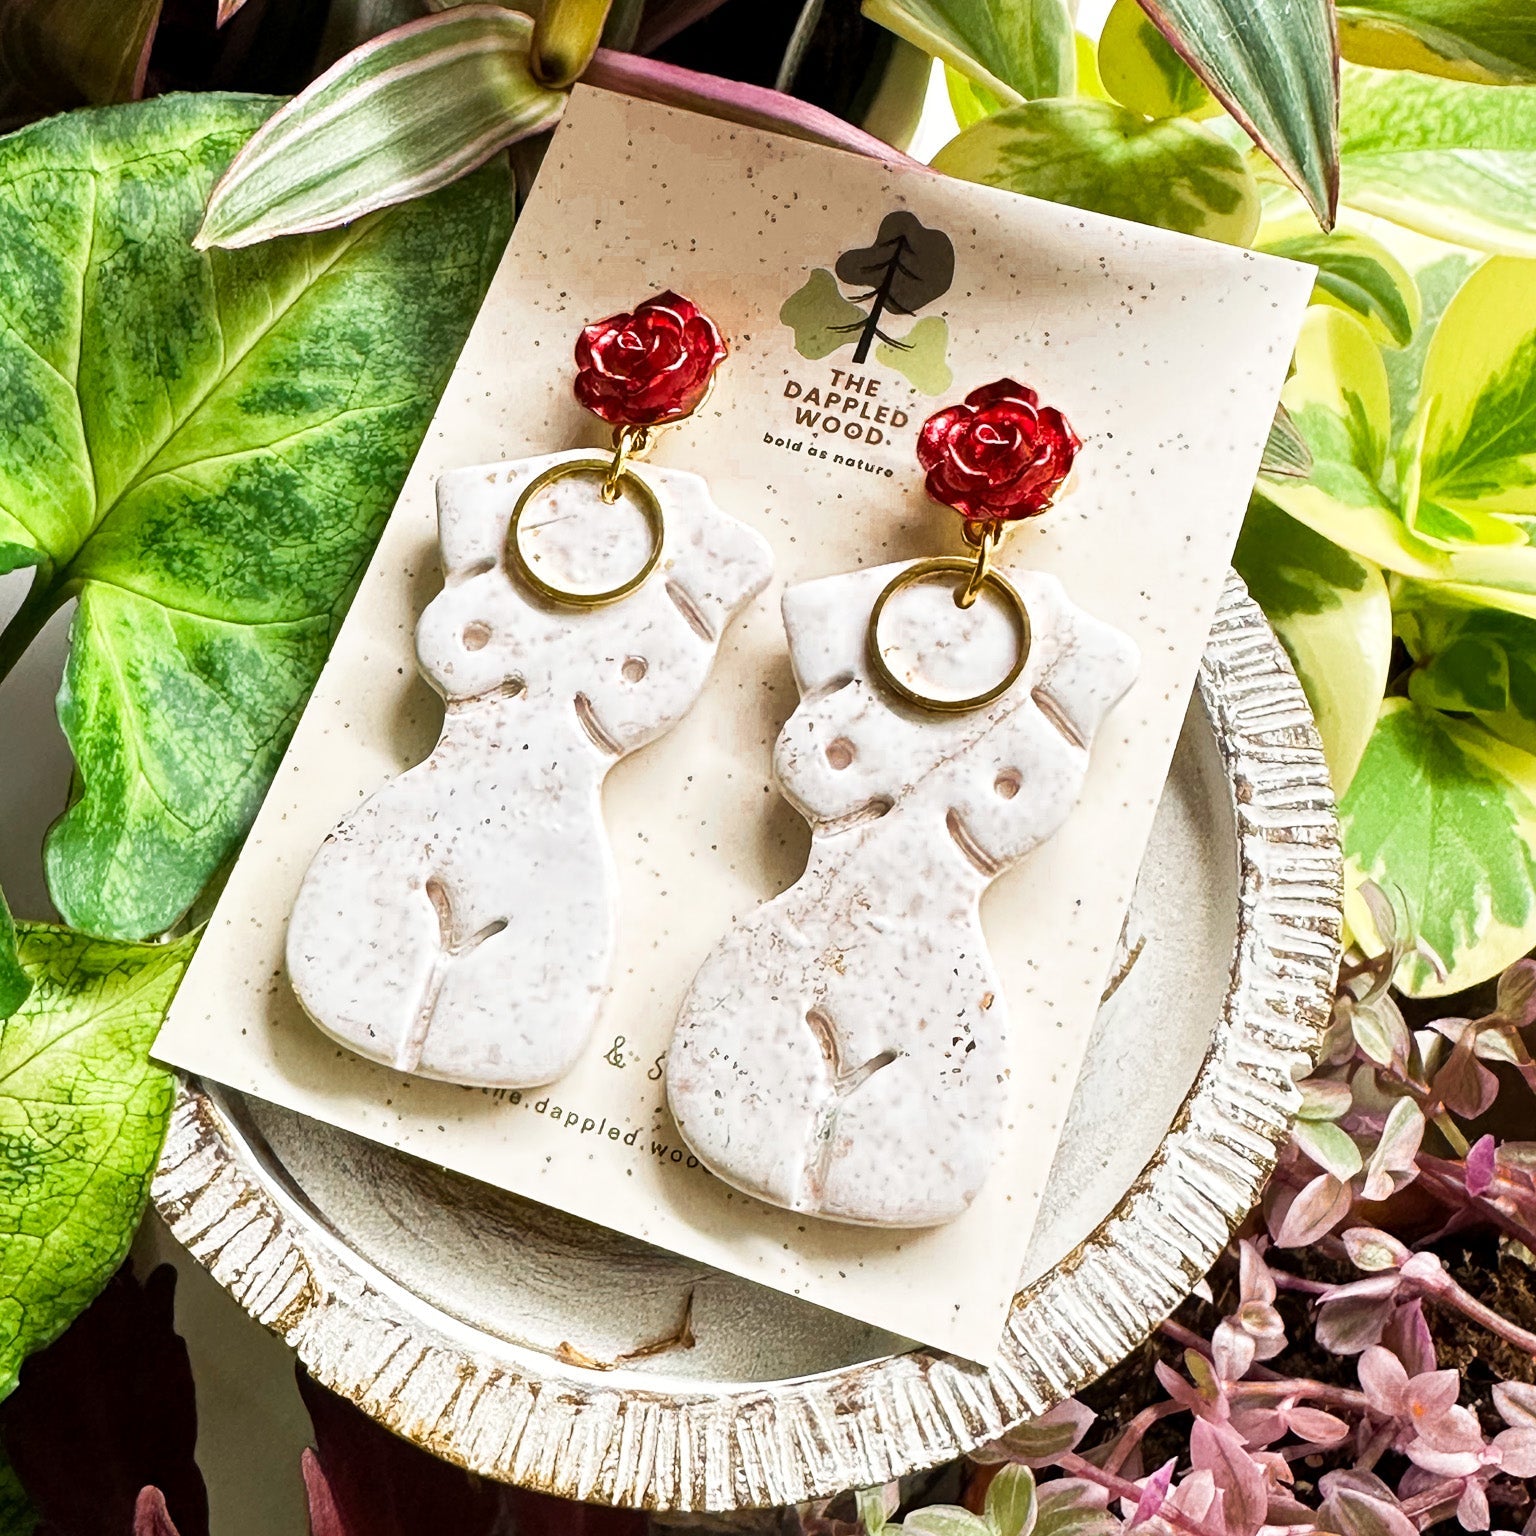 Elegant white polymer clay earrings with gold specks in the shape of a natural, curvy woman with a gold circle pendant, hanging from radiant red and gold rose posts. Earrings are showcased on a branded 'The Dappled Wood' card surrounded by lush greenery.